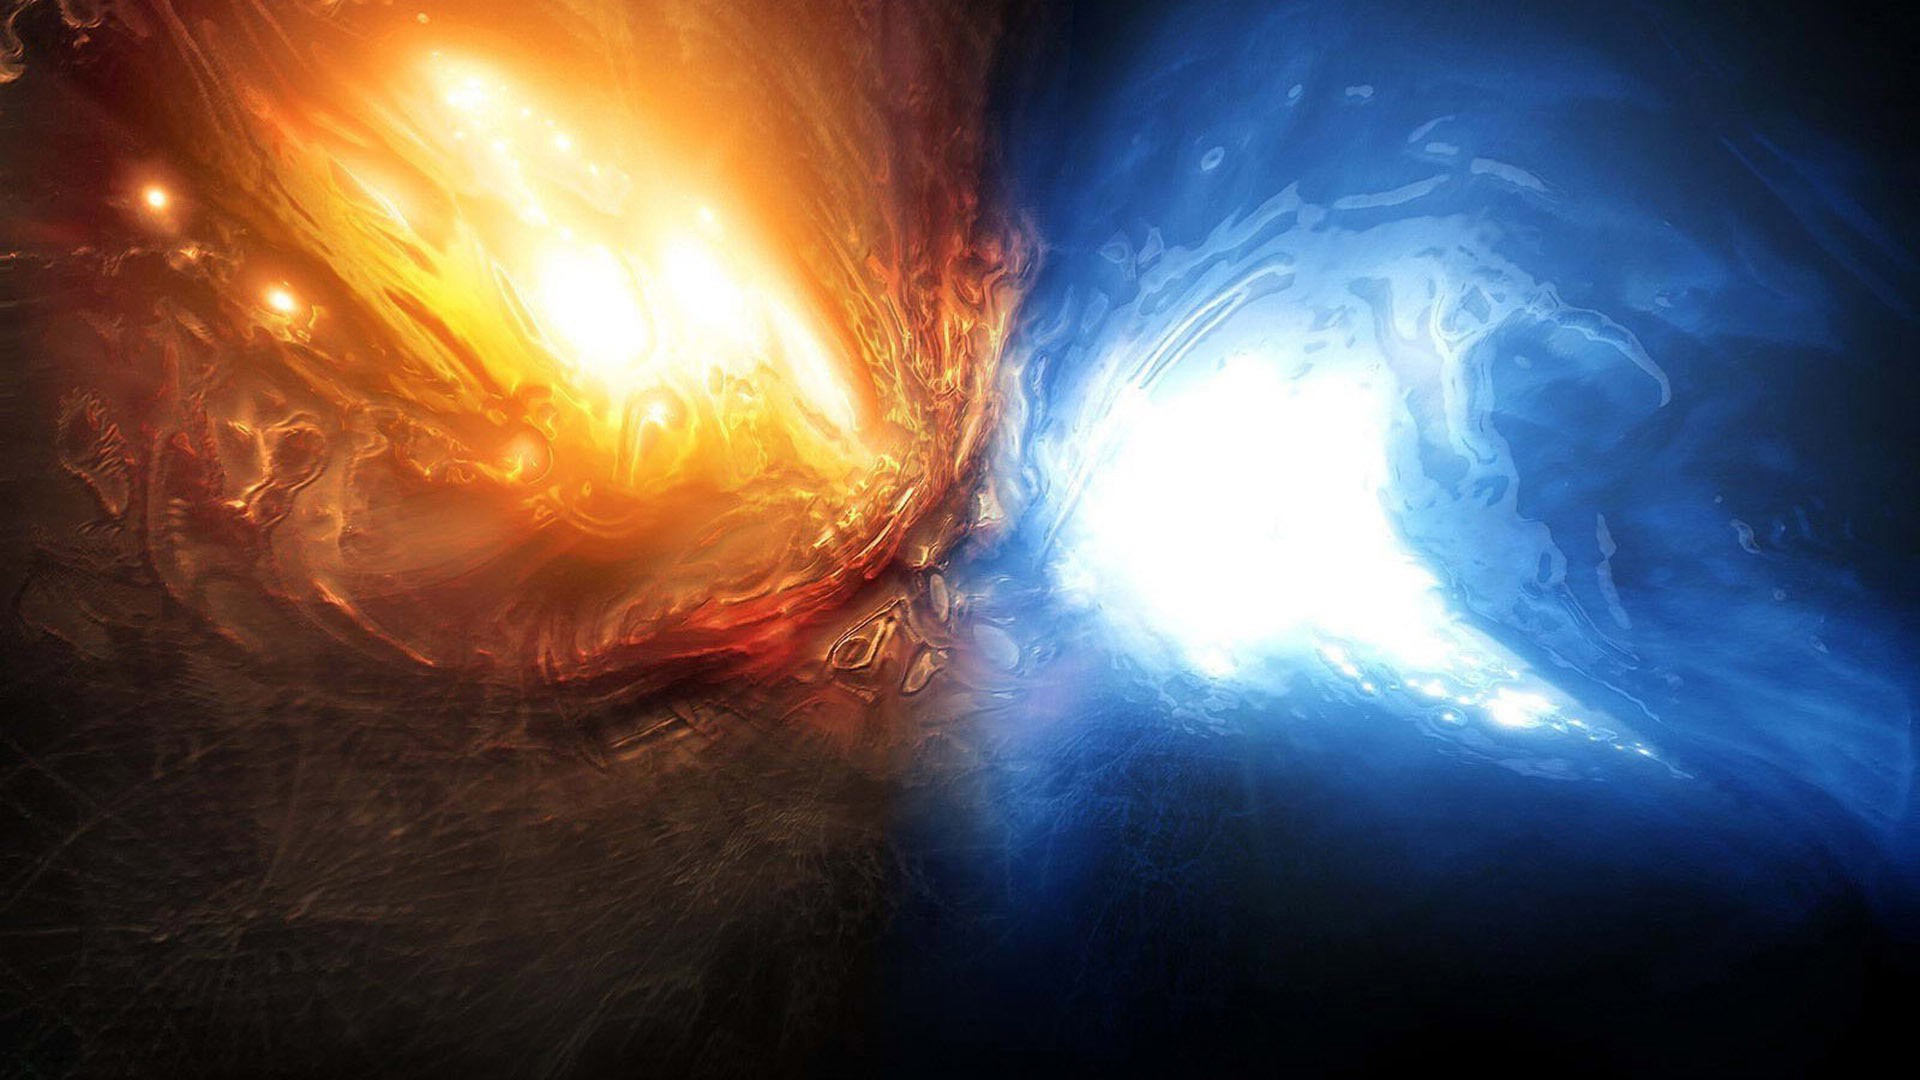 water, Abstract, Blue, Red, Fire, Earth, Artwork Wallpaper